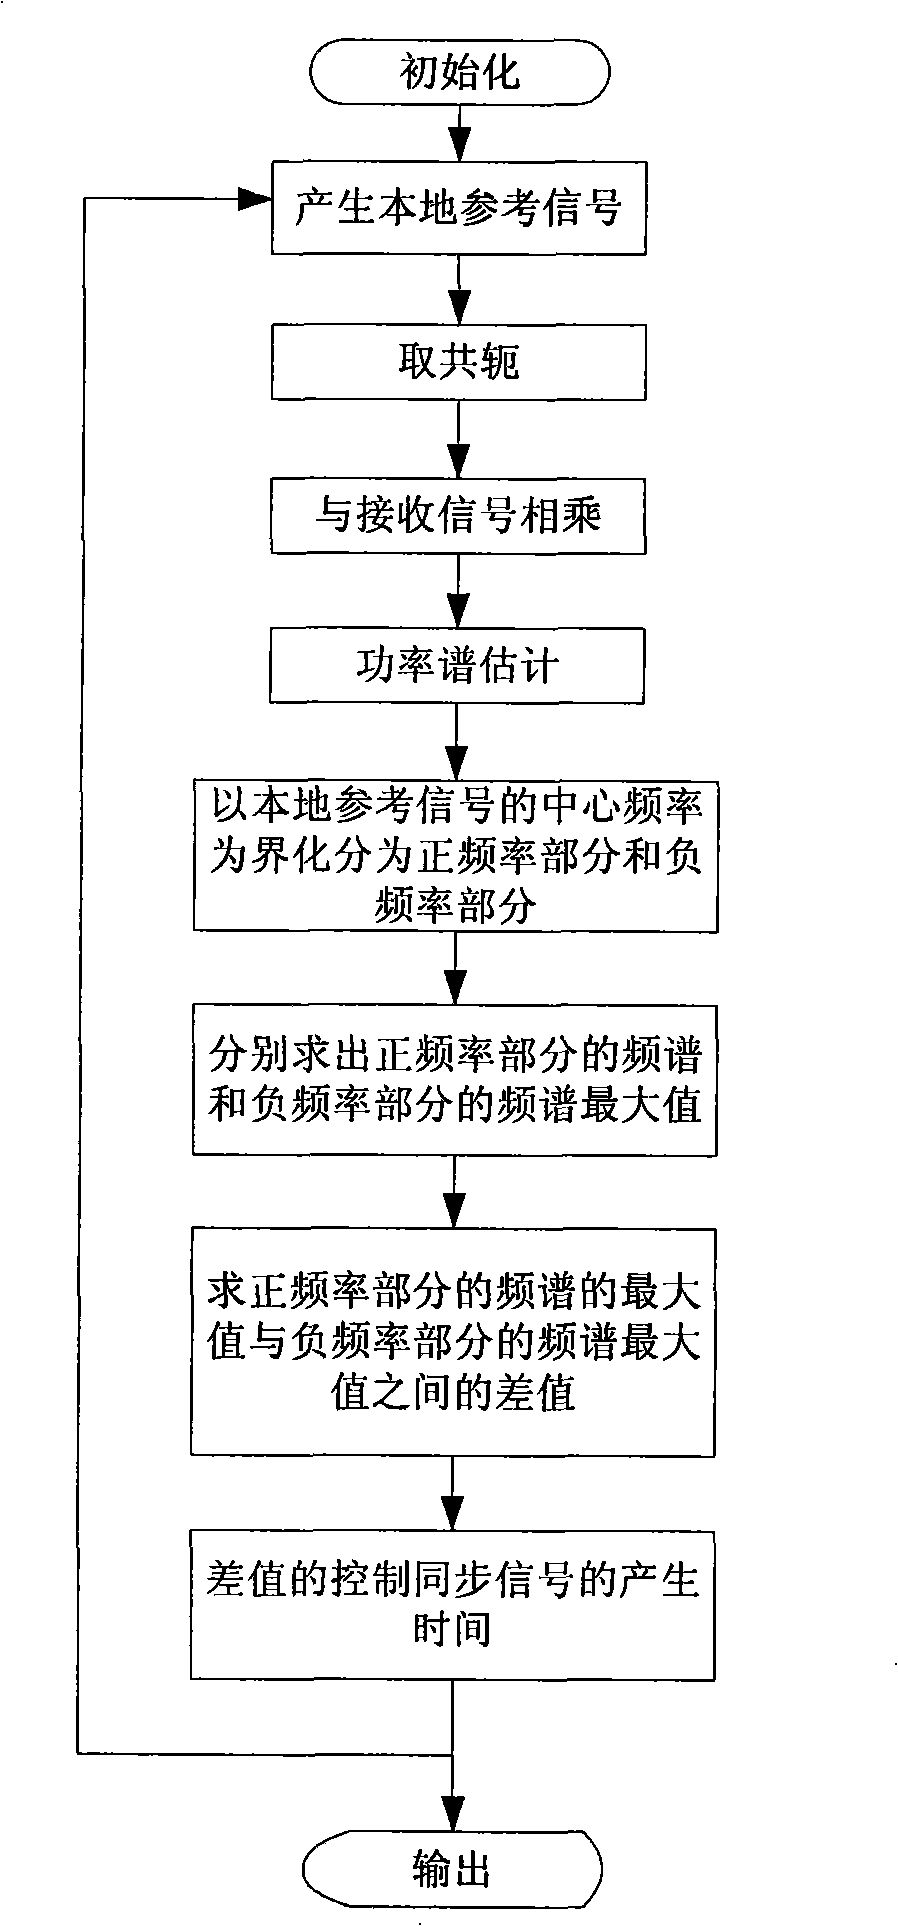 Synchronization process and element for CHIRP spread spectrum communication system